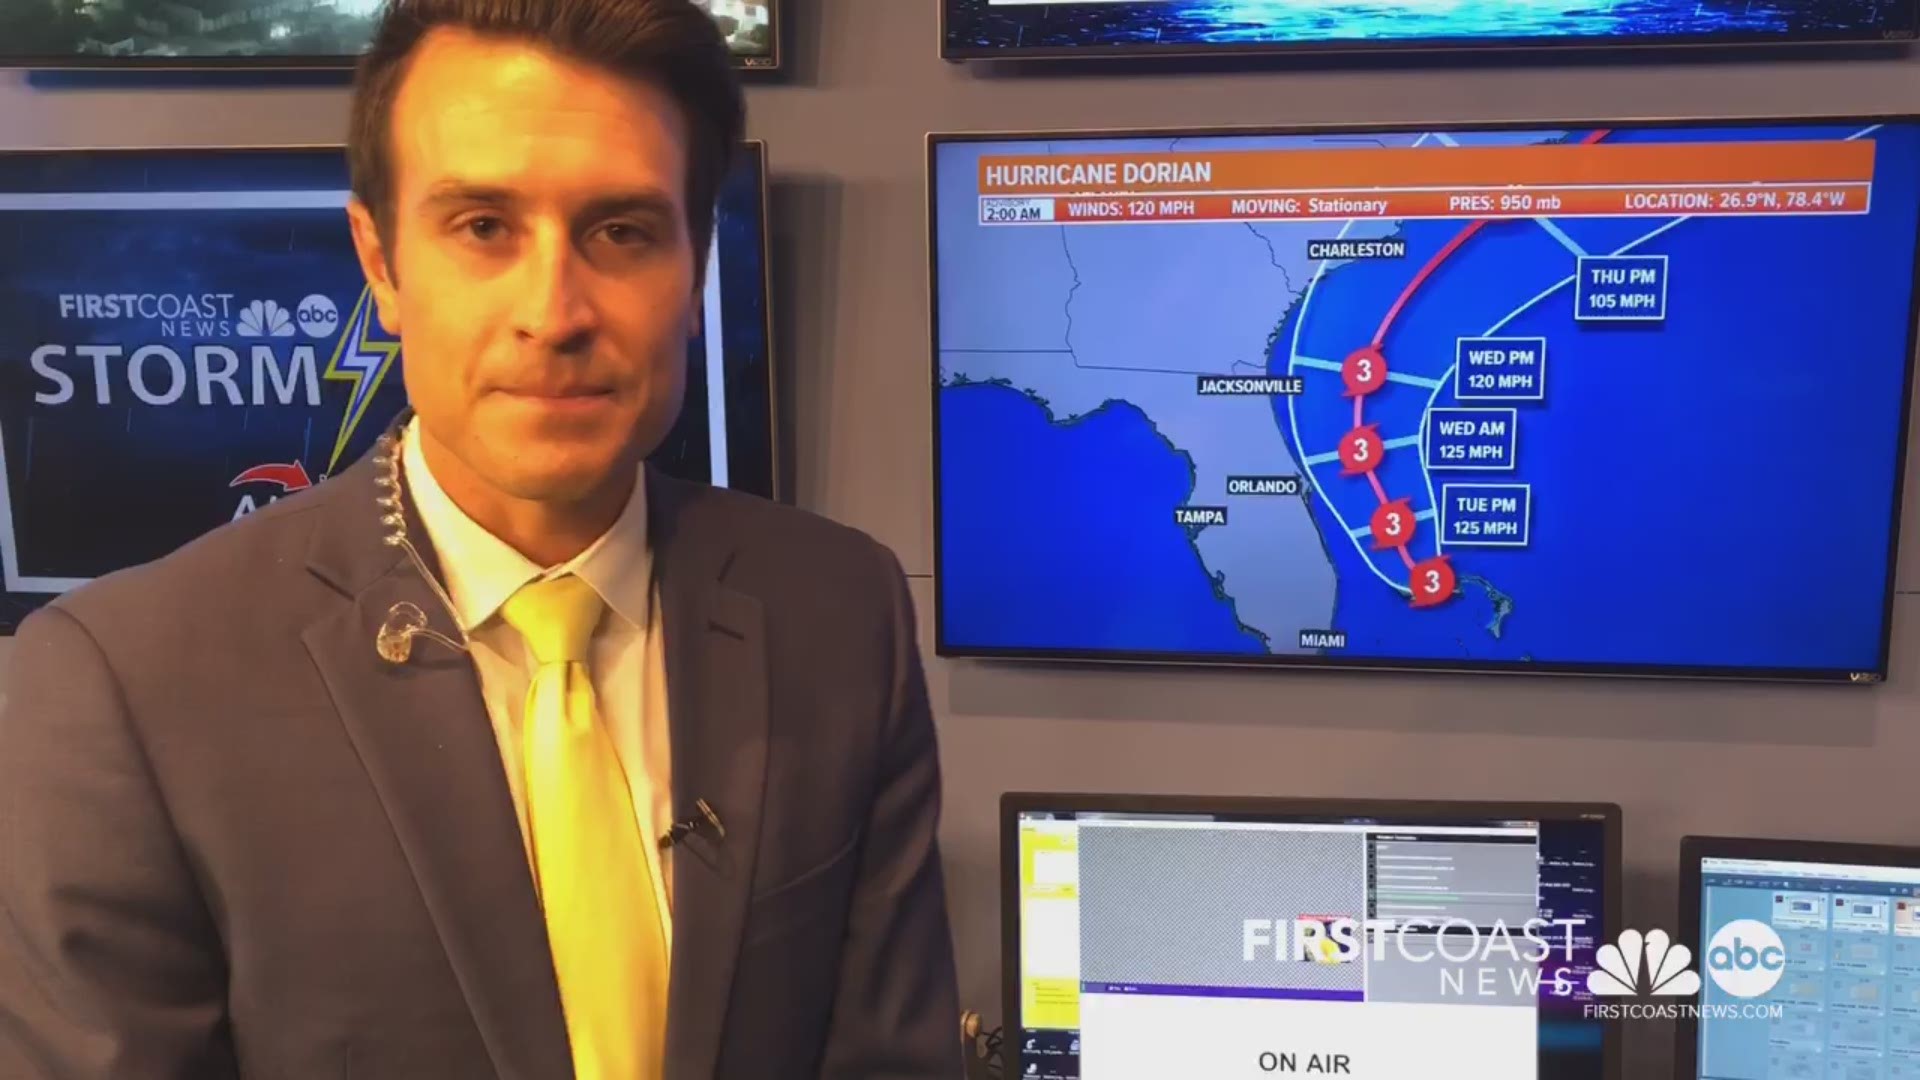 Good news! The First Coast has officially moved out of Hurricane Dorian's 'cone of concern'.